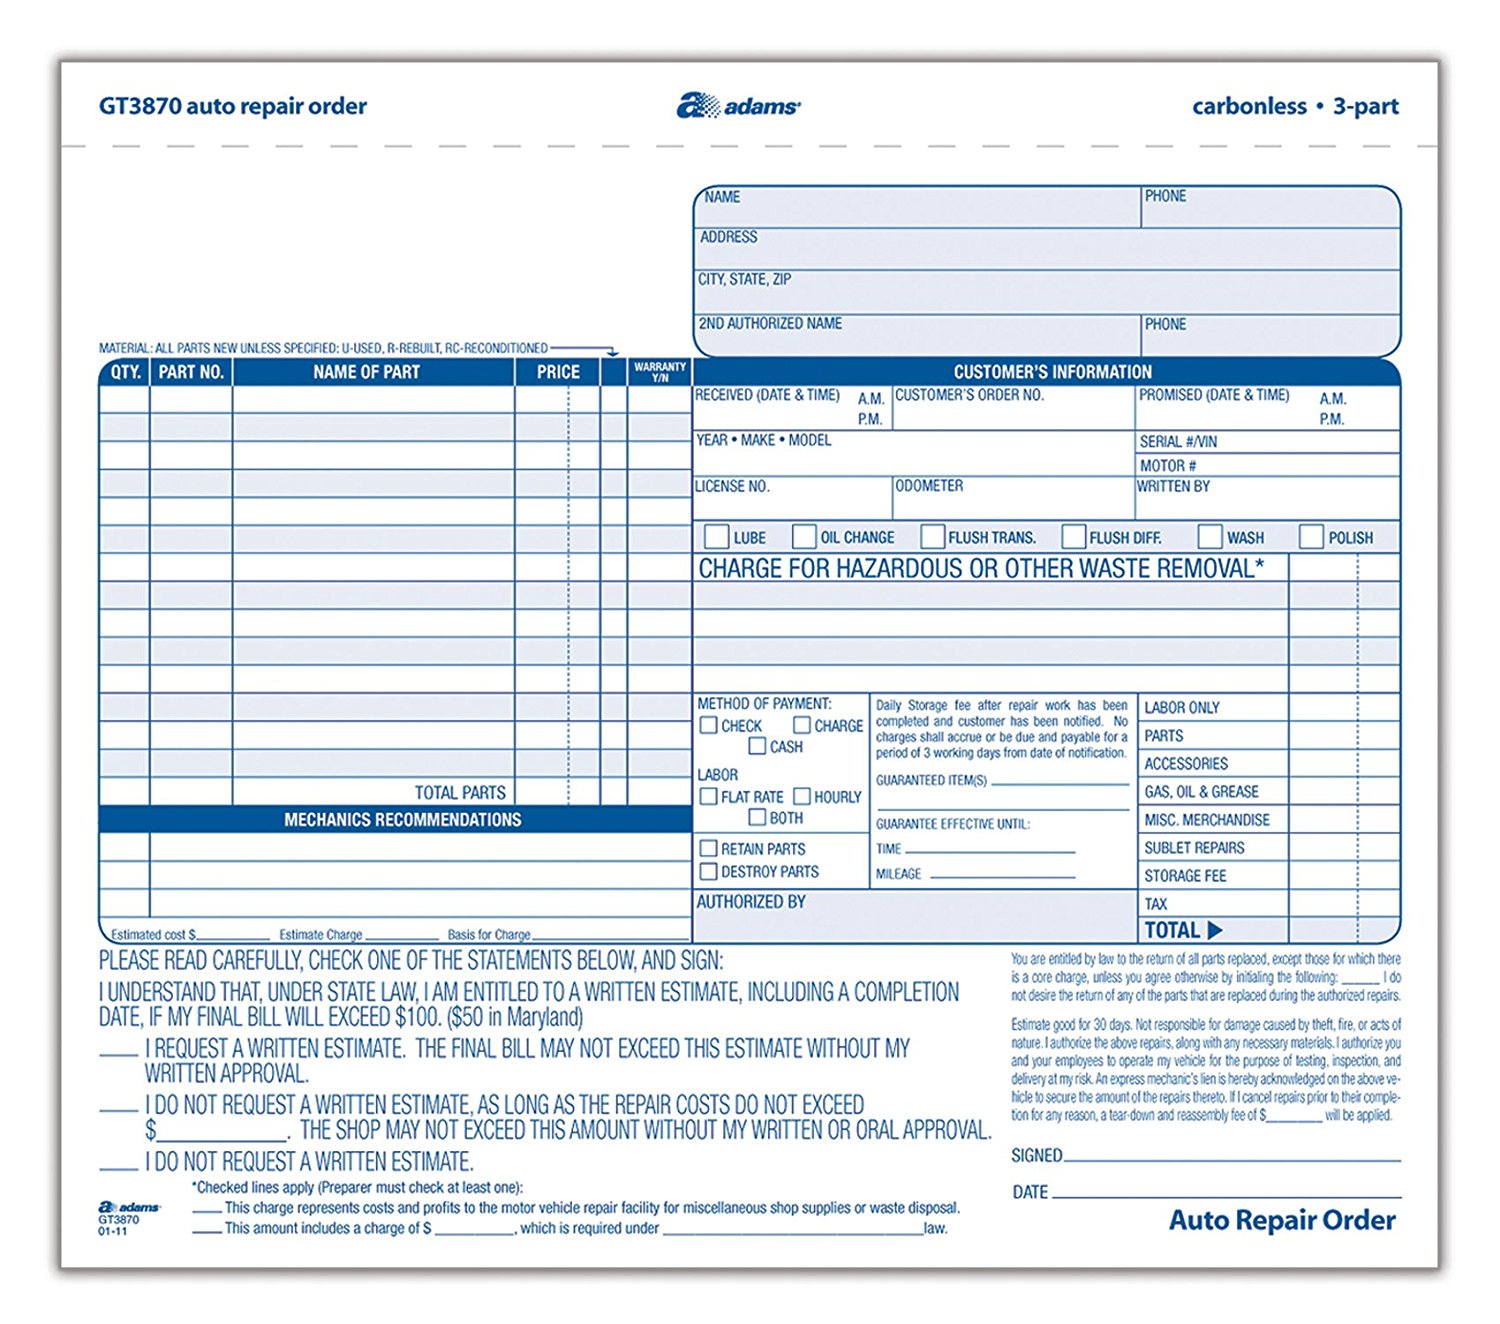 Personalized Auto Repair Forms, Vehicle Inspection forms